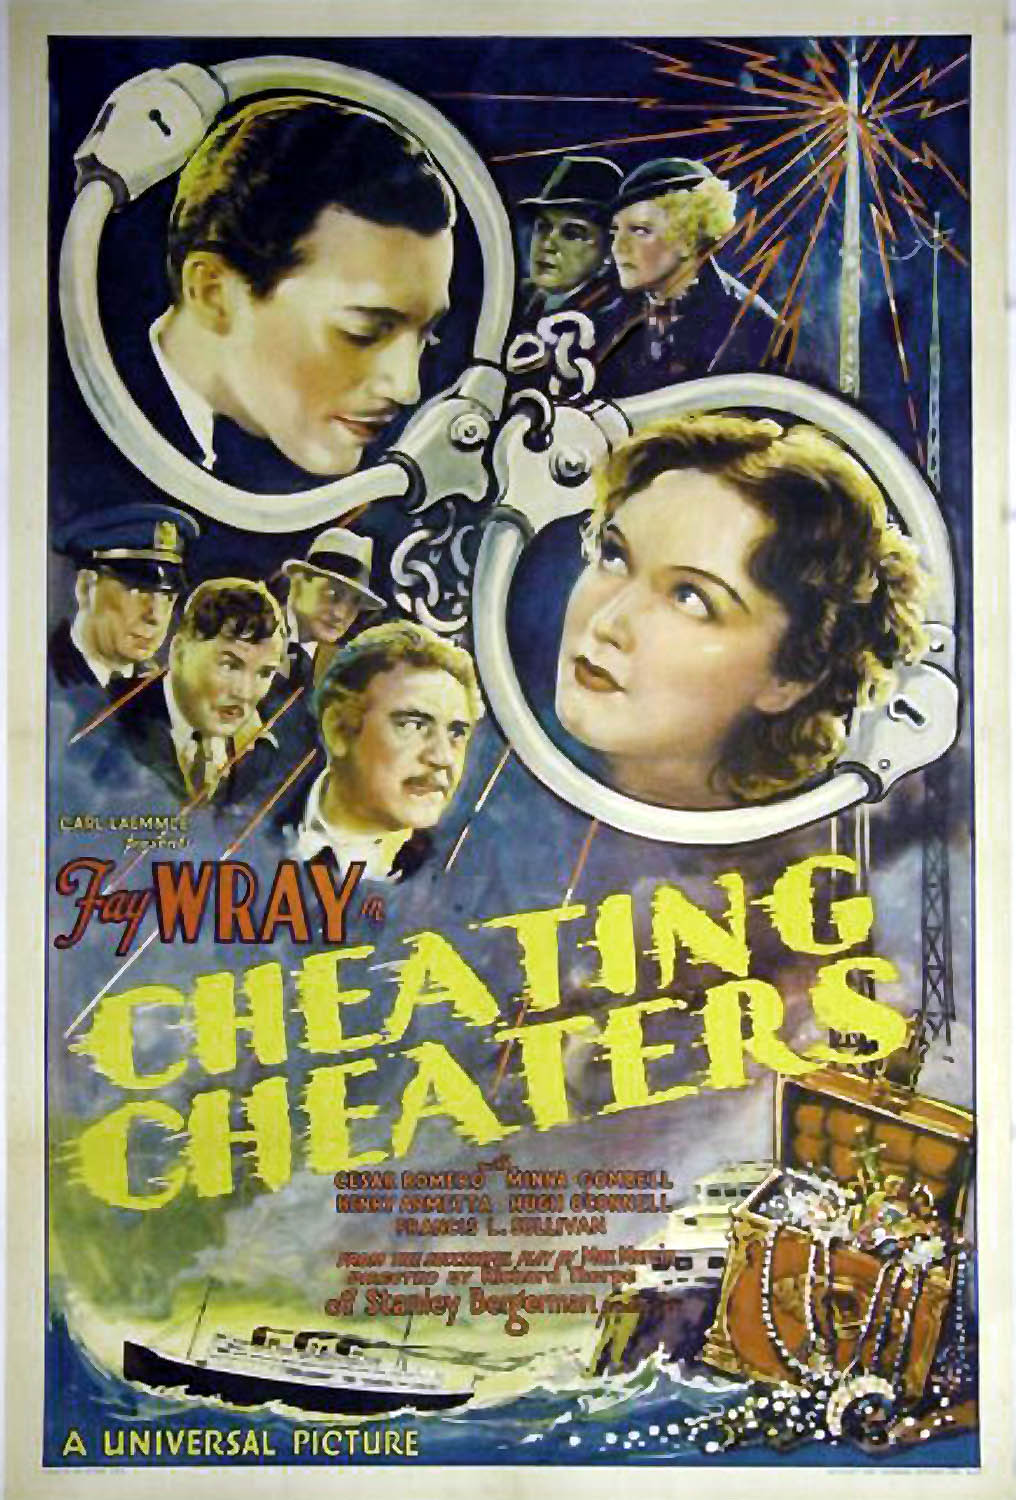 CHEATING CHEATERS